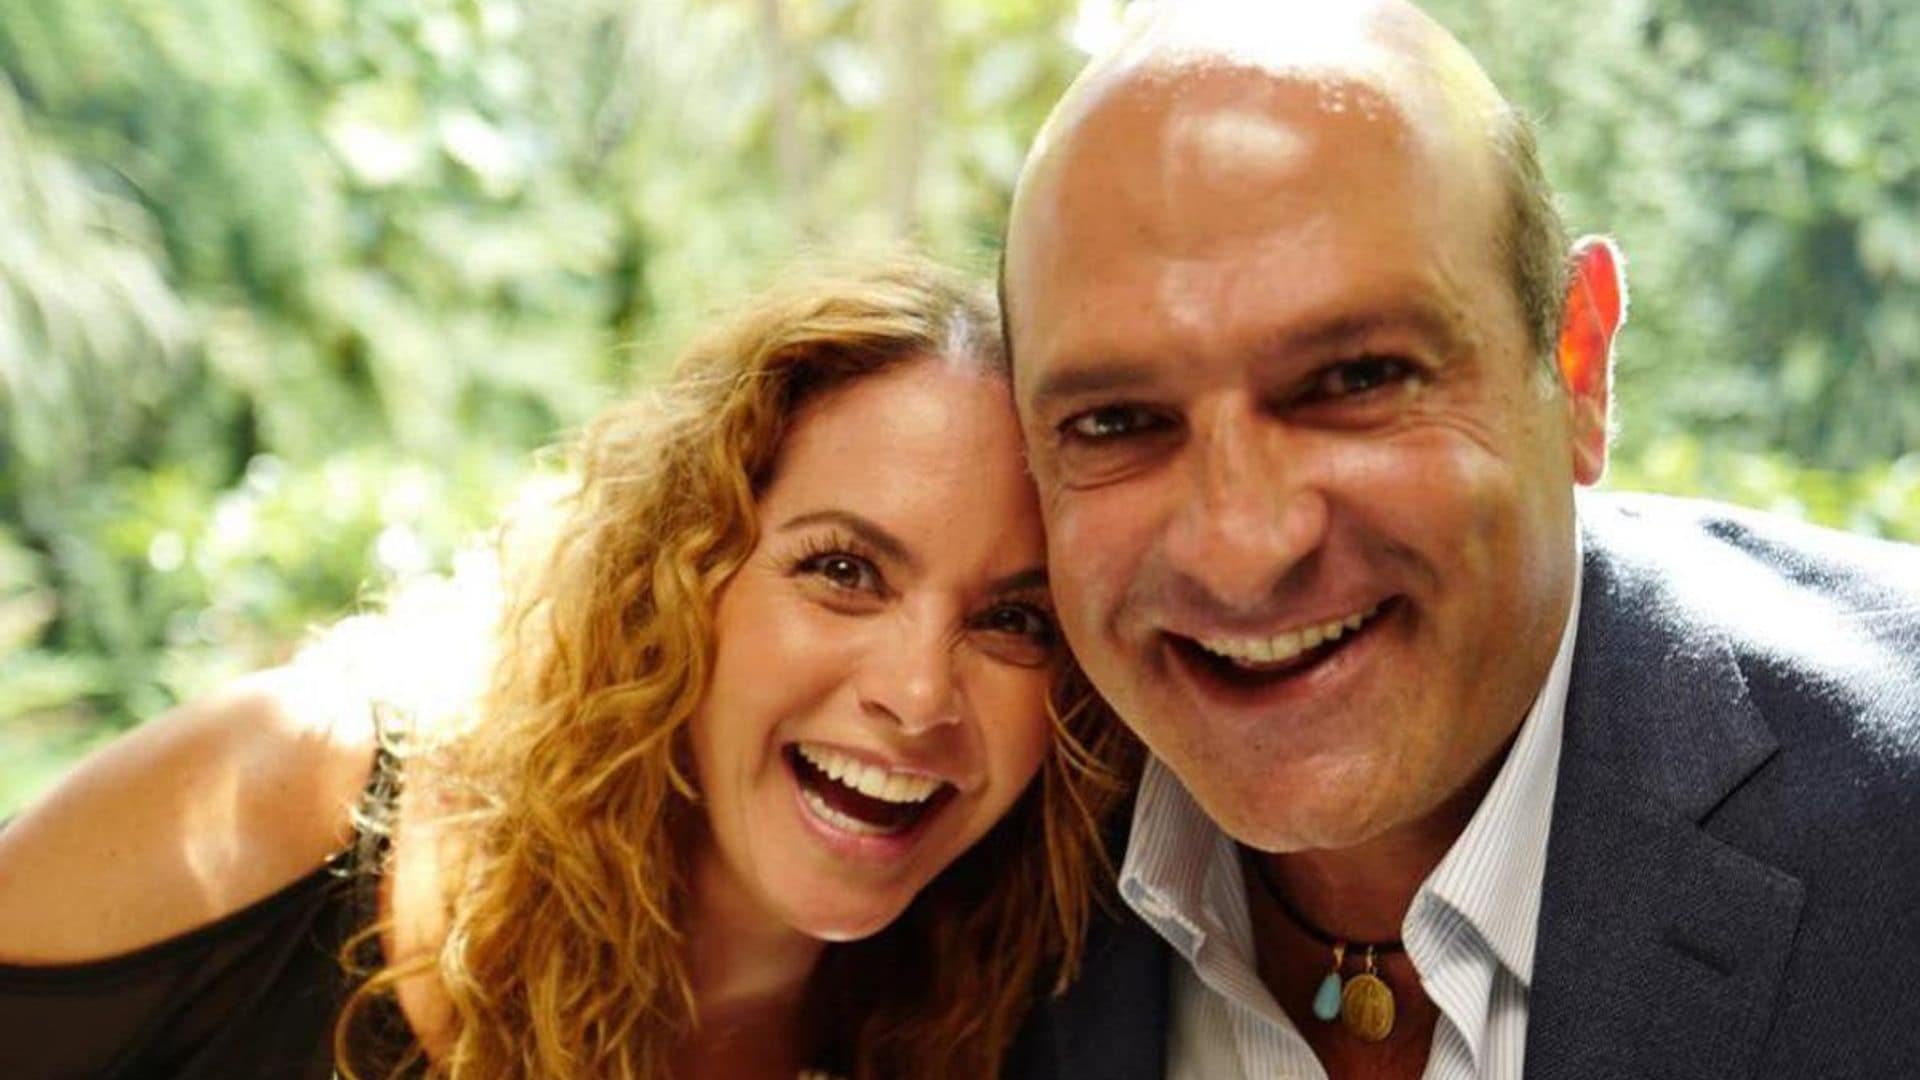 Lucero and Michel Kuri announce their separation after over a decade together